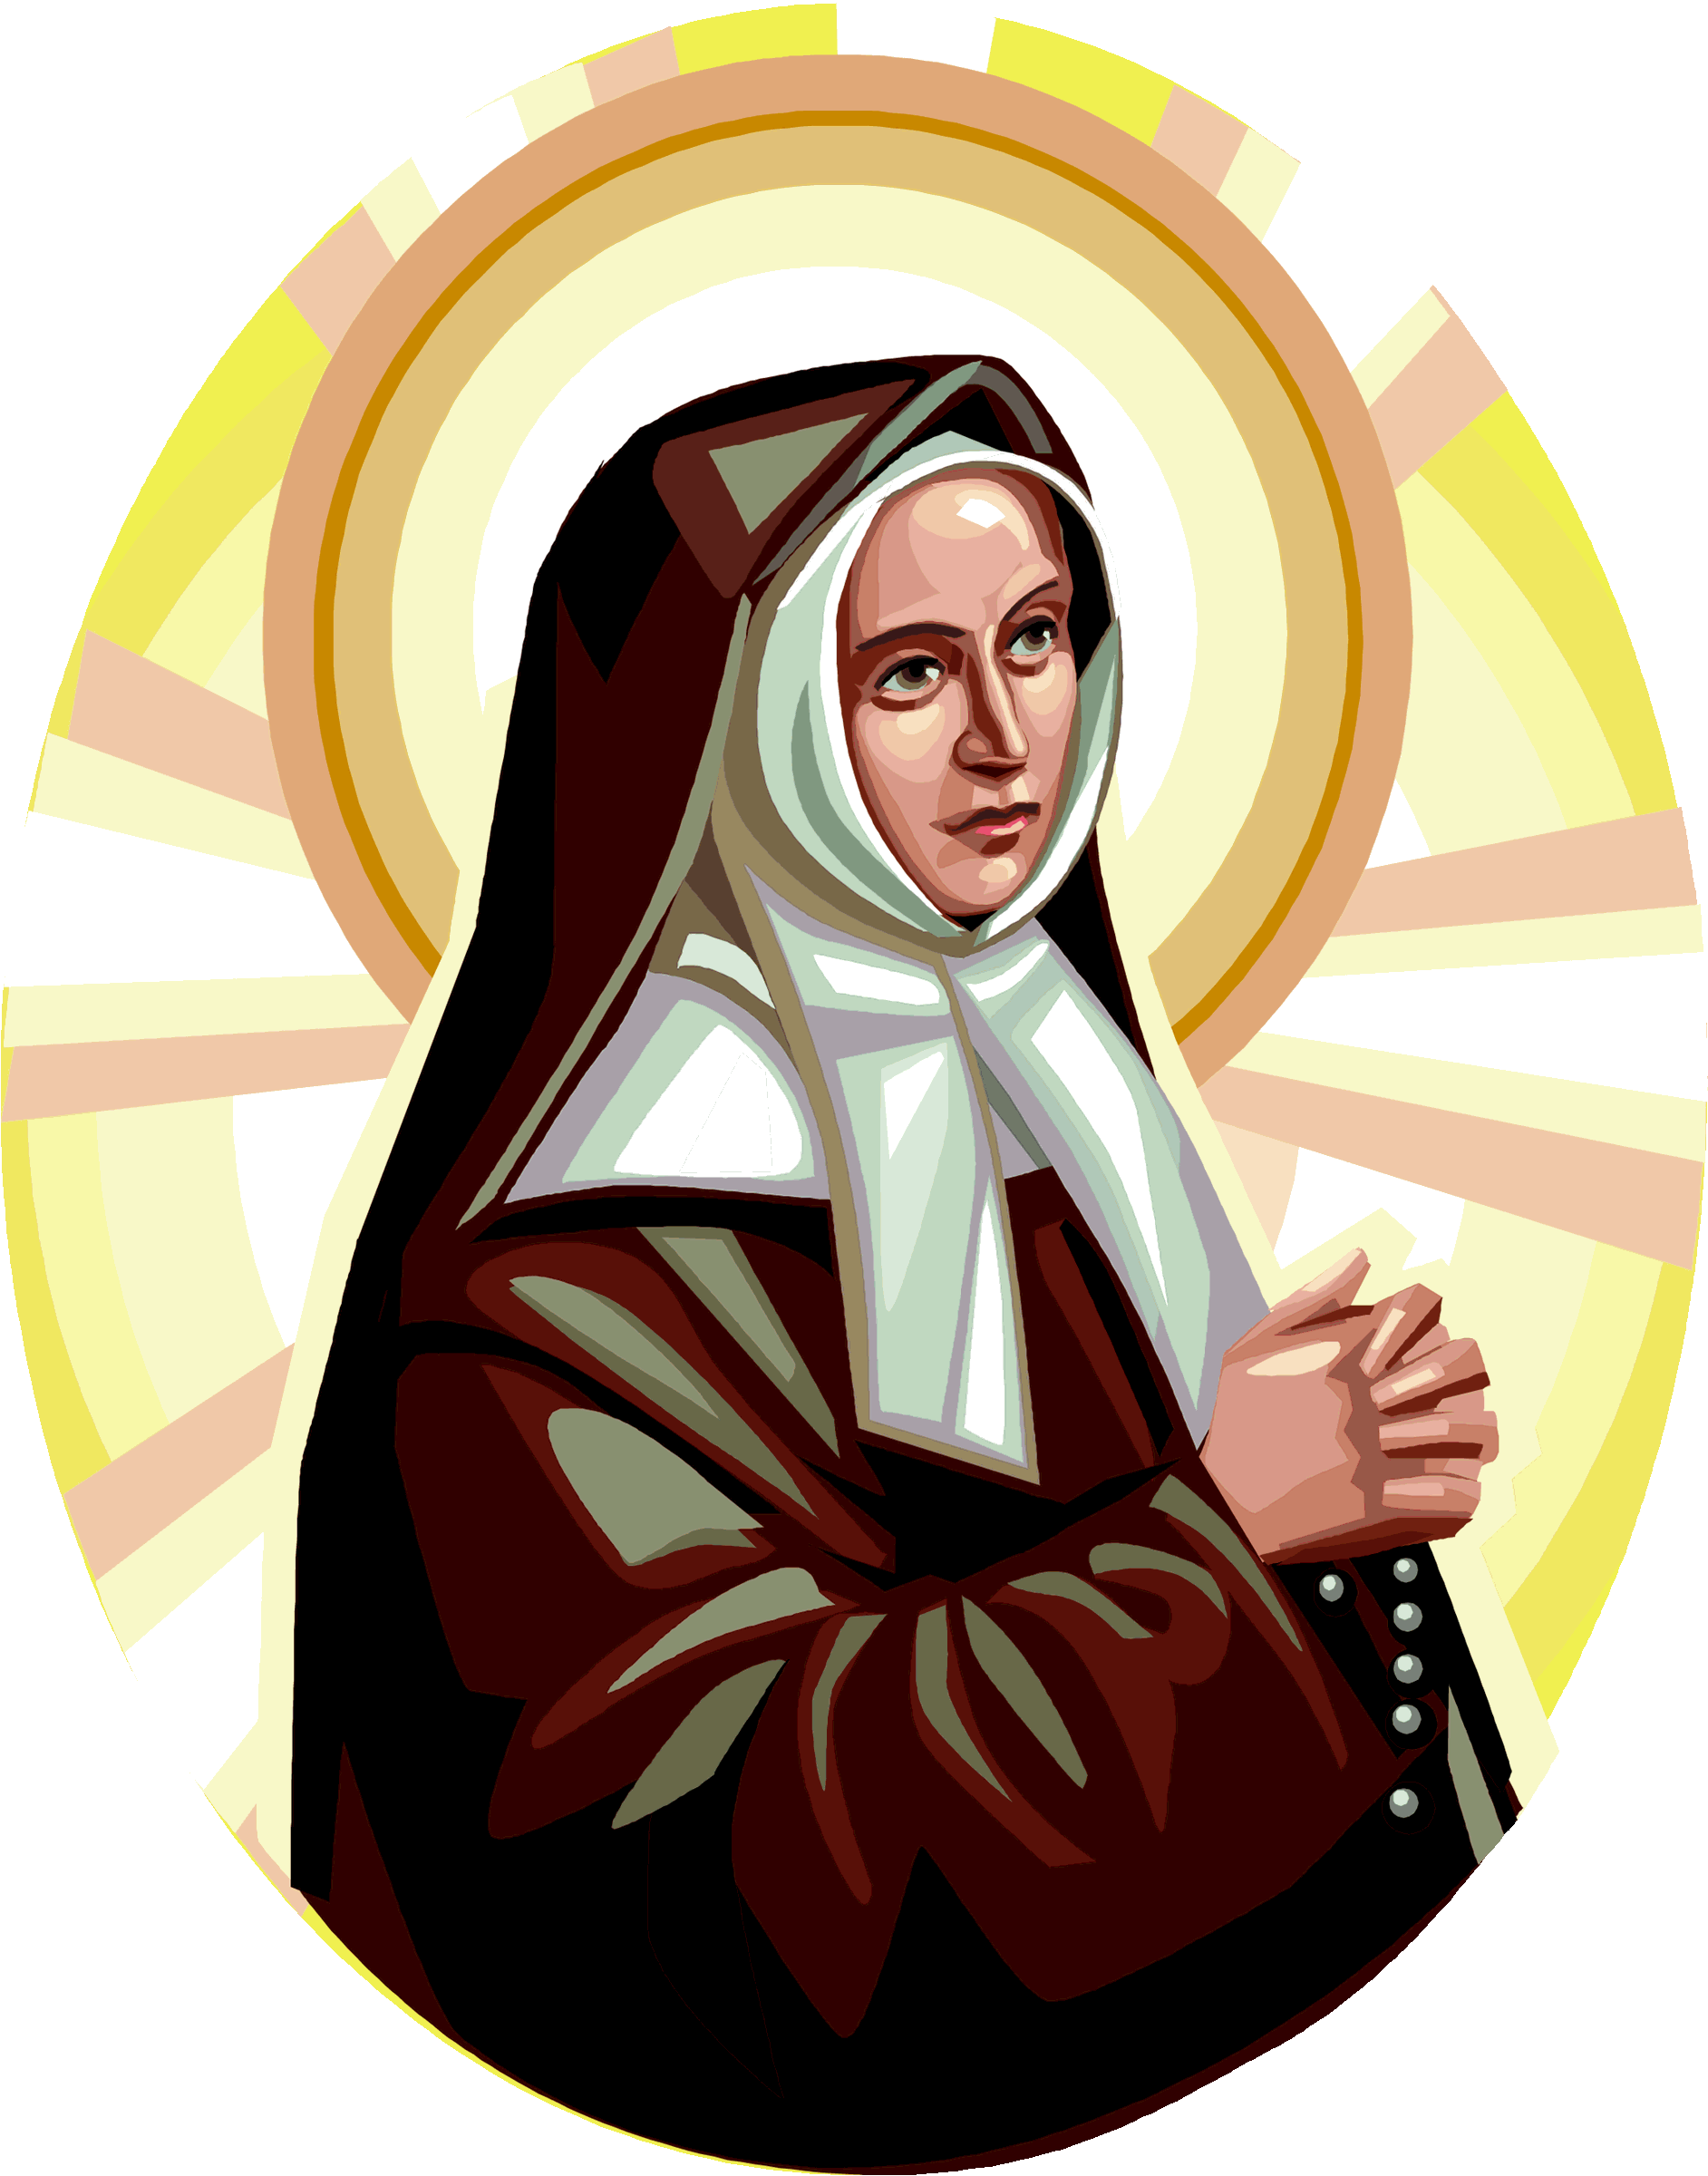 funny nun clipart images - photo #30